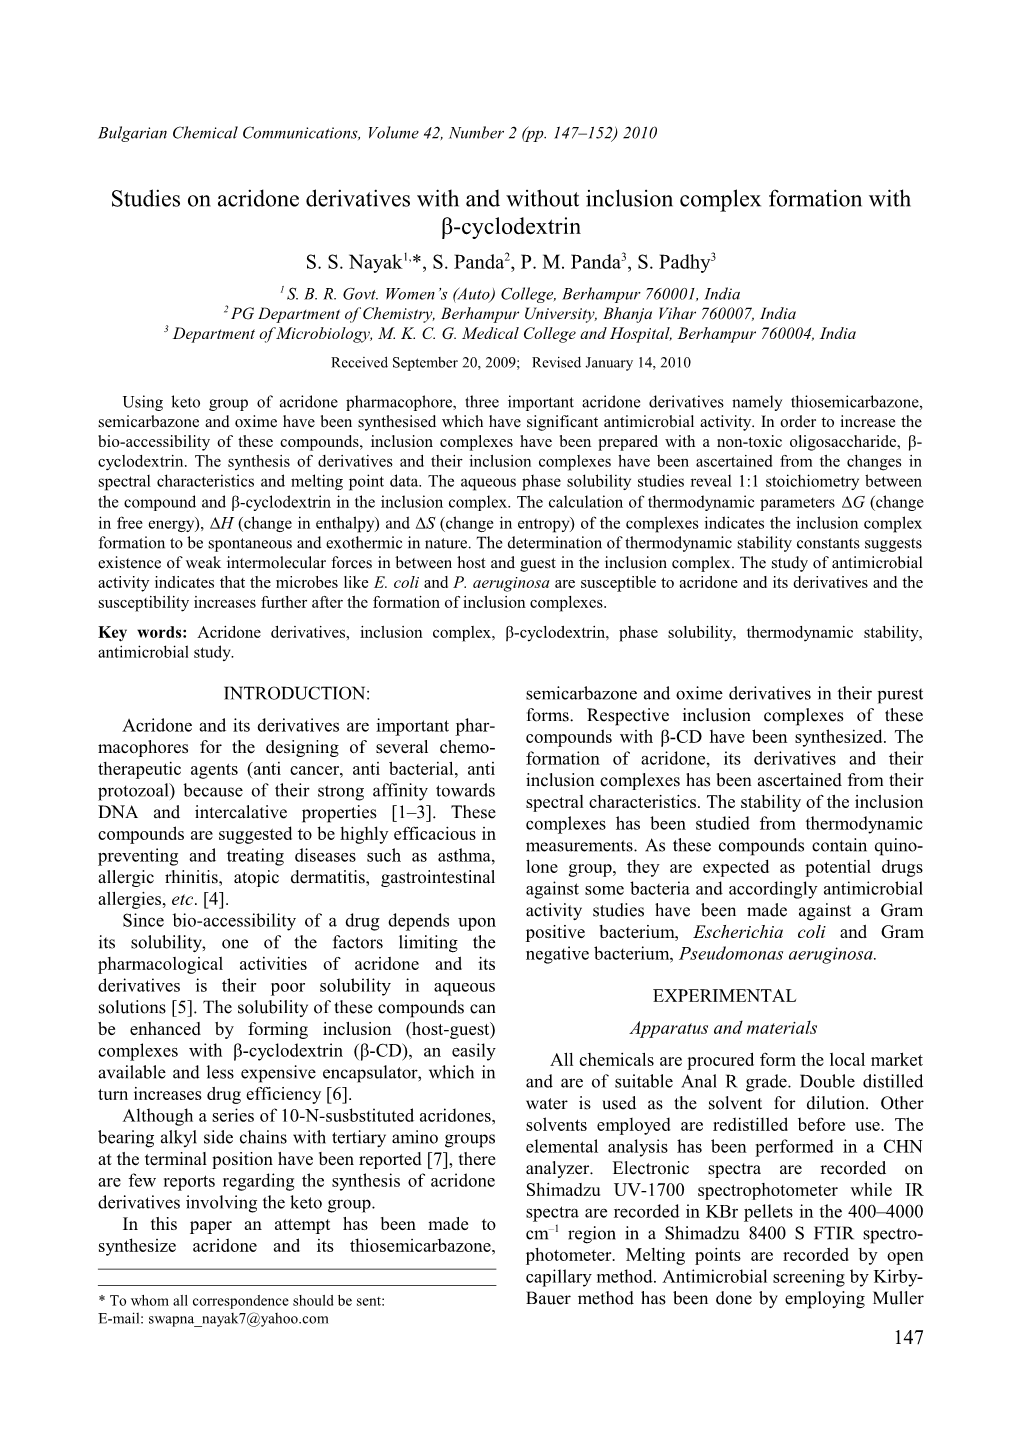 Studies on Acridone Derivatives with and Without Inclusion Complex Formation